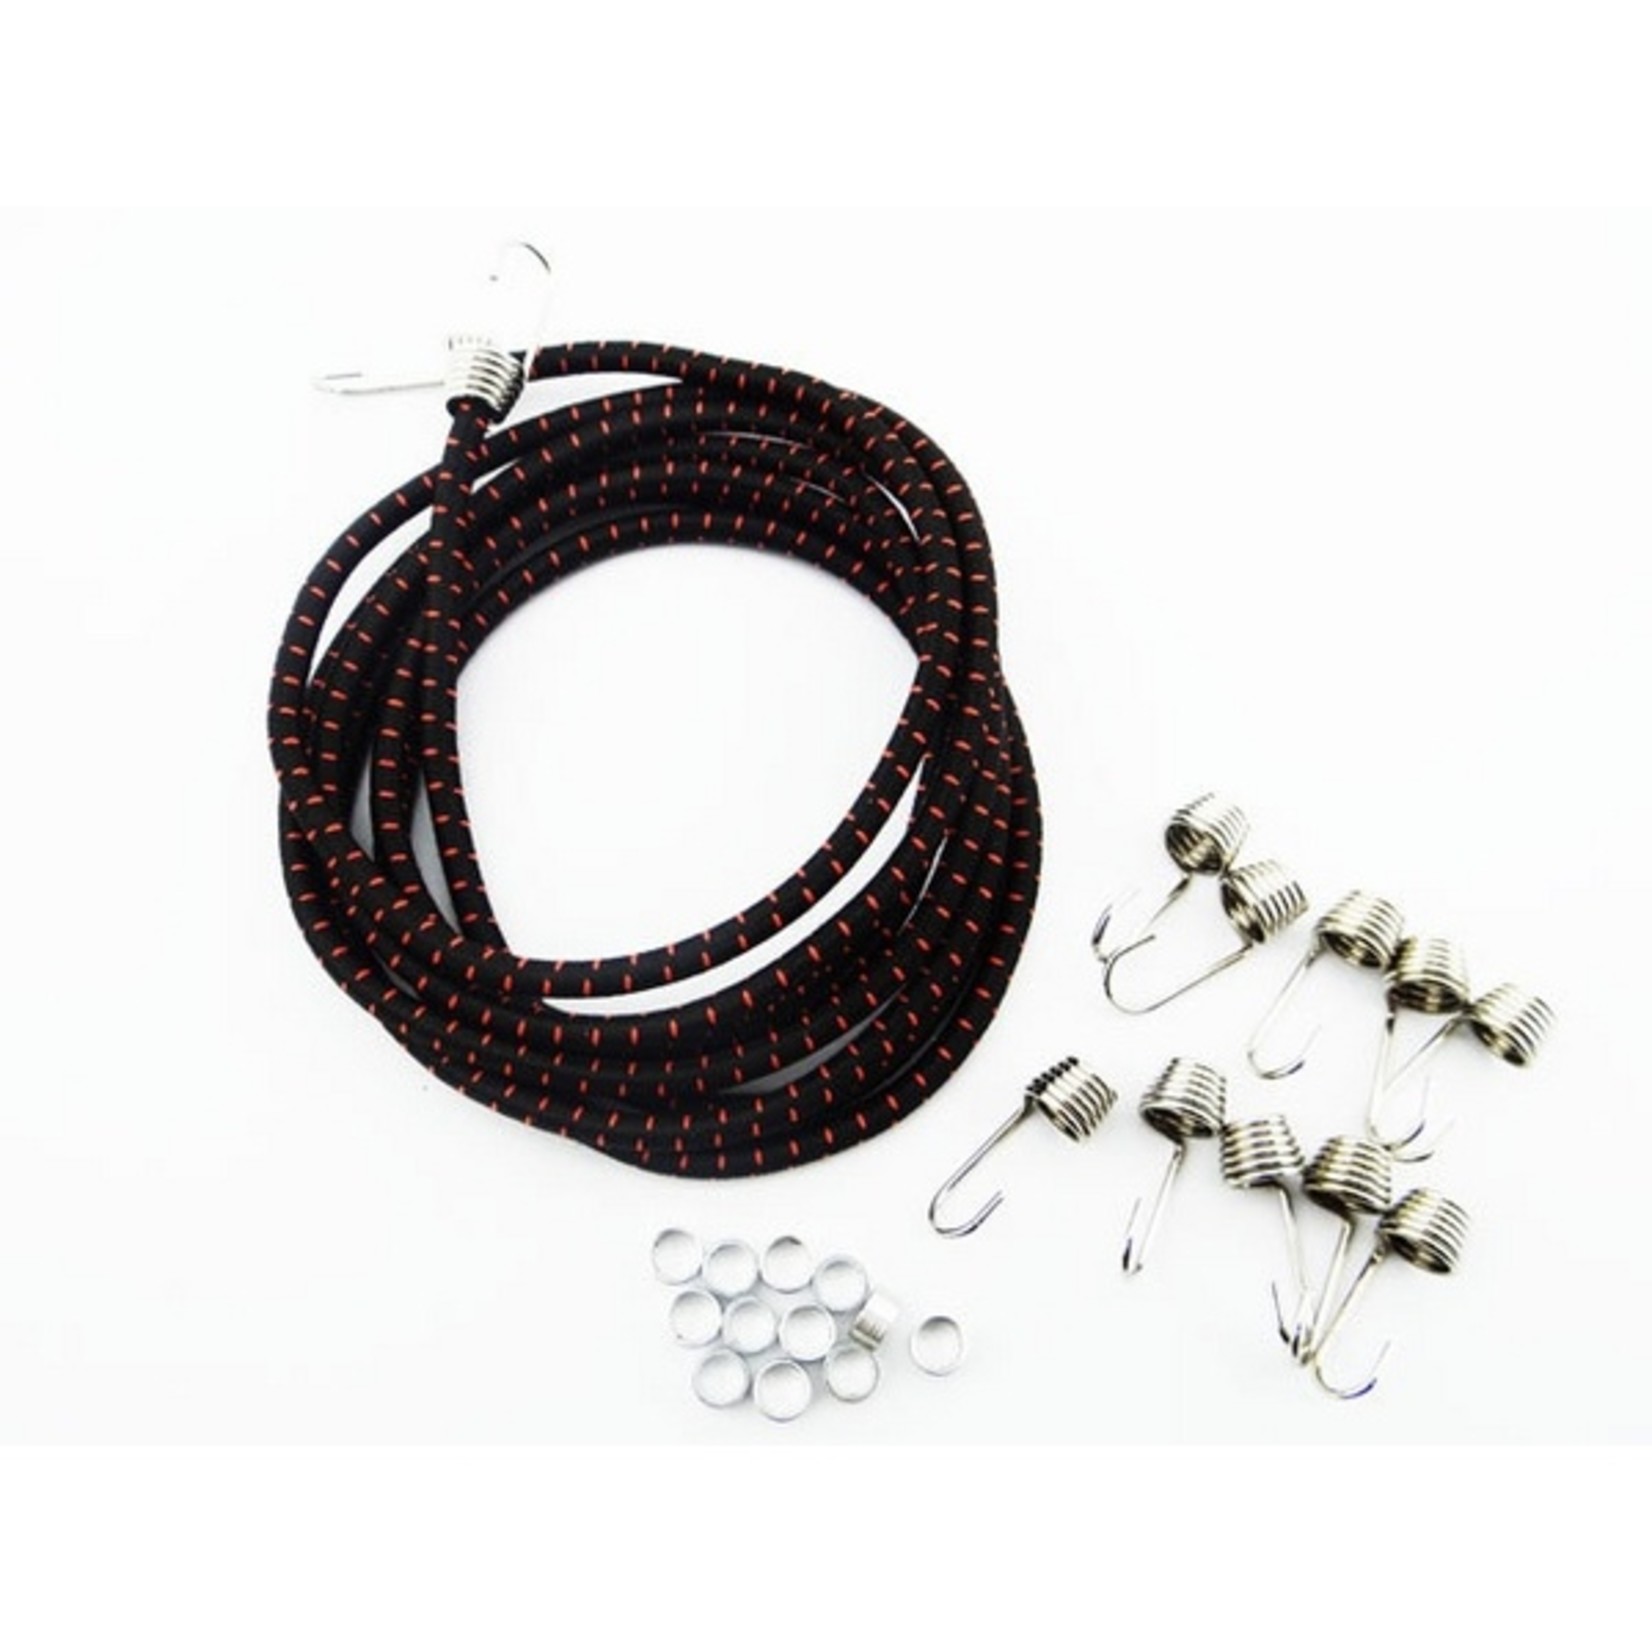 Hot Racing 1/10 Scale Black/Red Bungee Cord Kit